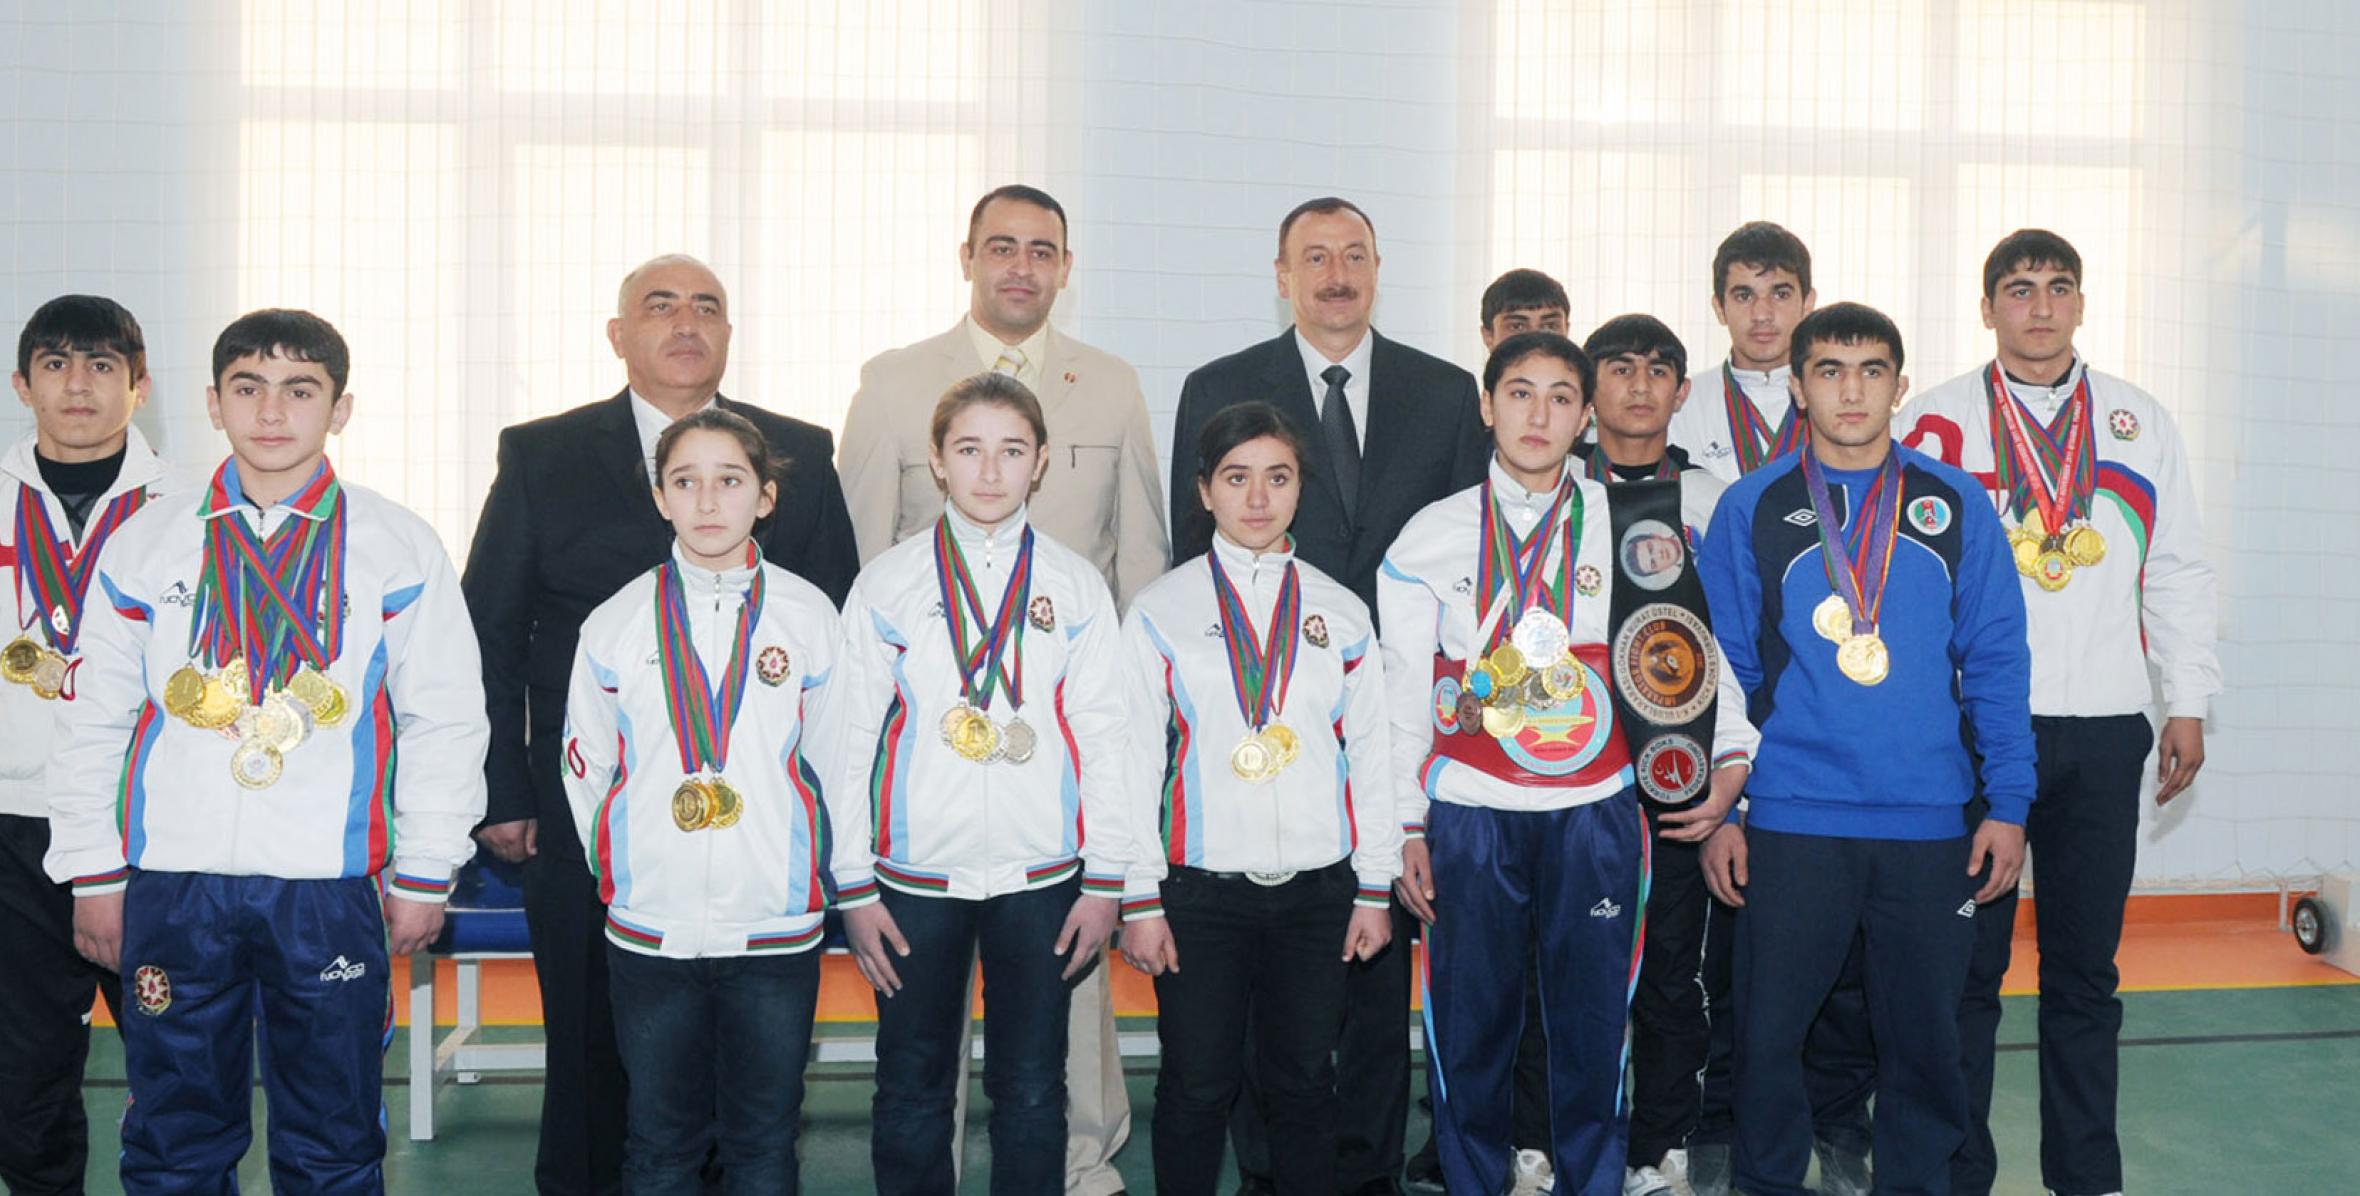 Ilham Aliyev participated at the opening of a new building of secondary school number 3 in Goranboy city